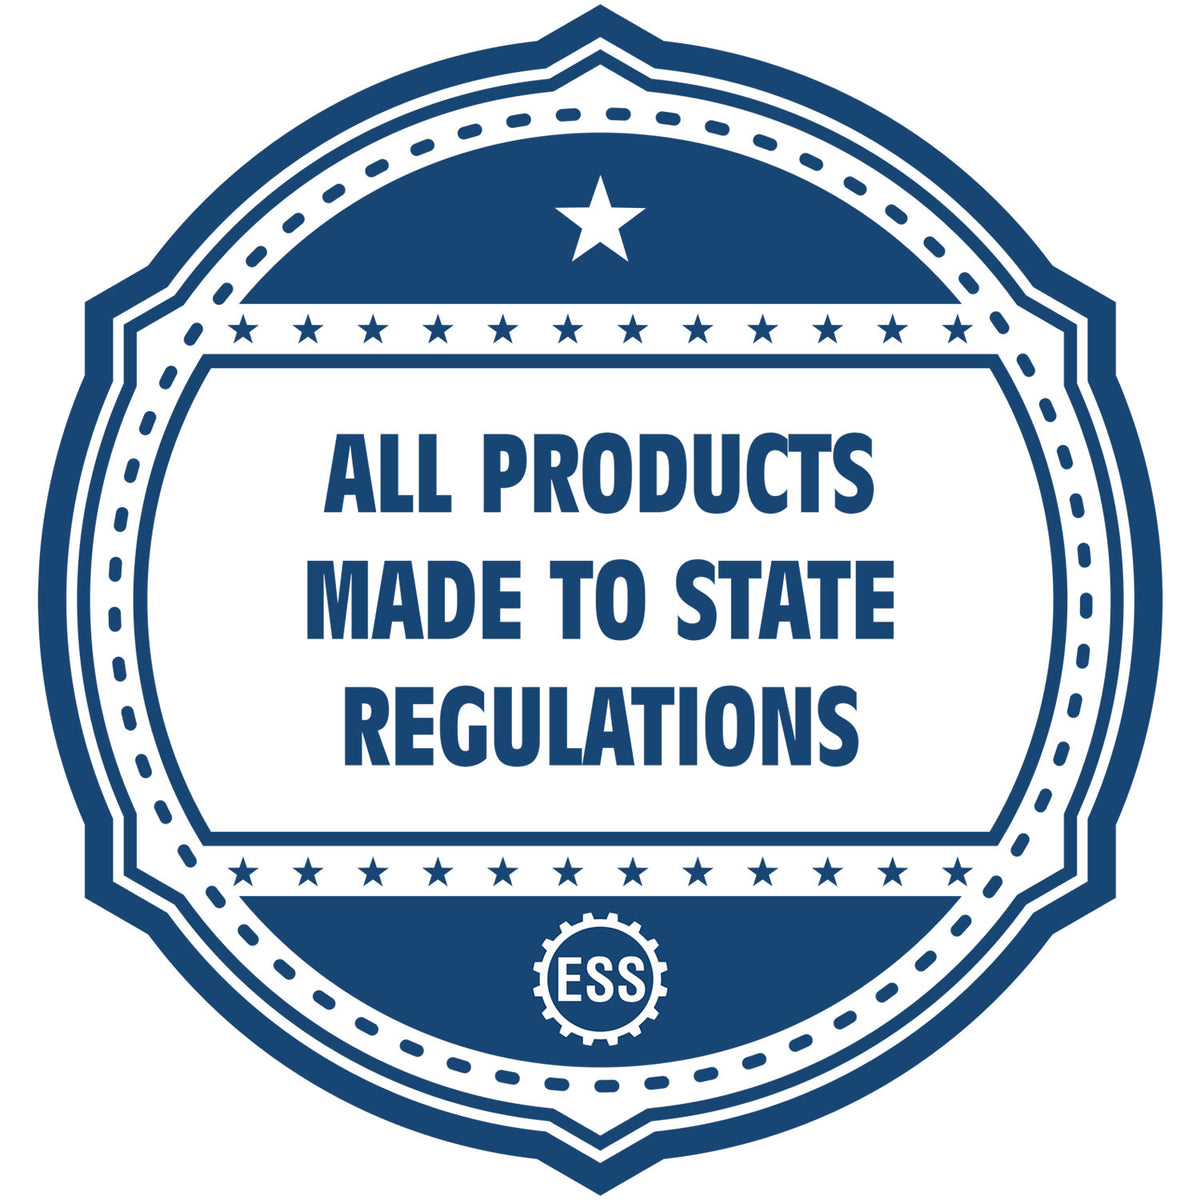 An icon or badge element for the Slim Pre-Inked Massachusetts Land Surveyor Seal Stamp showing that this product is made in compliance with state regulations.